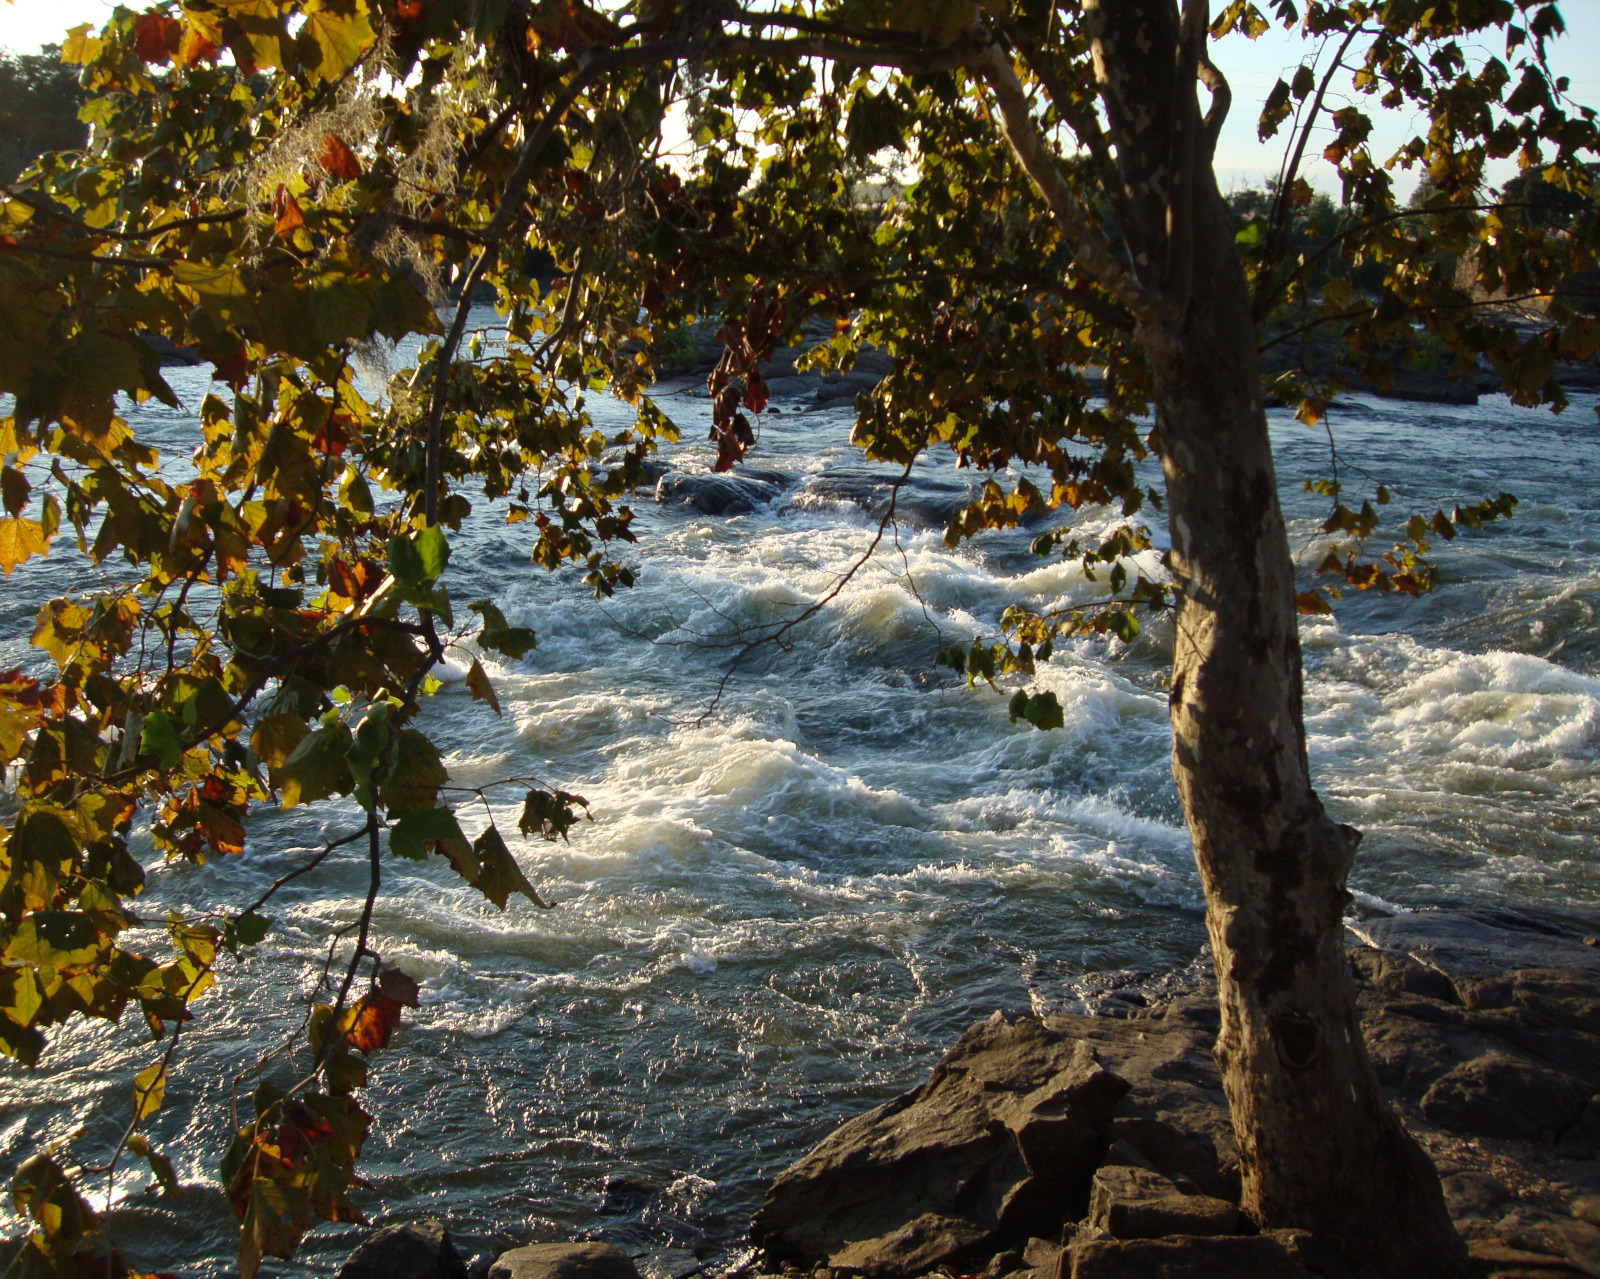 Whitewater on the Chattahoochee